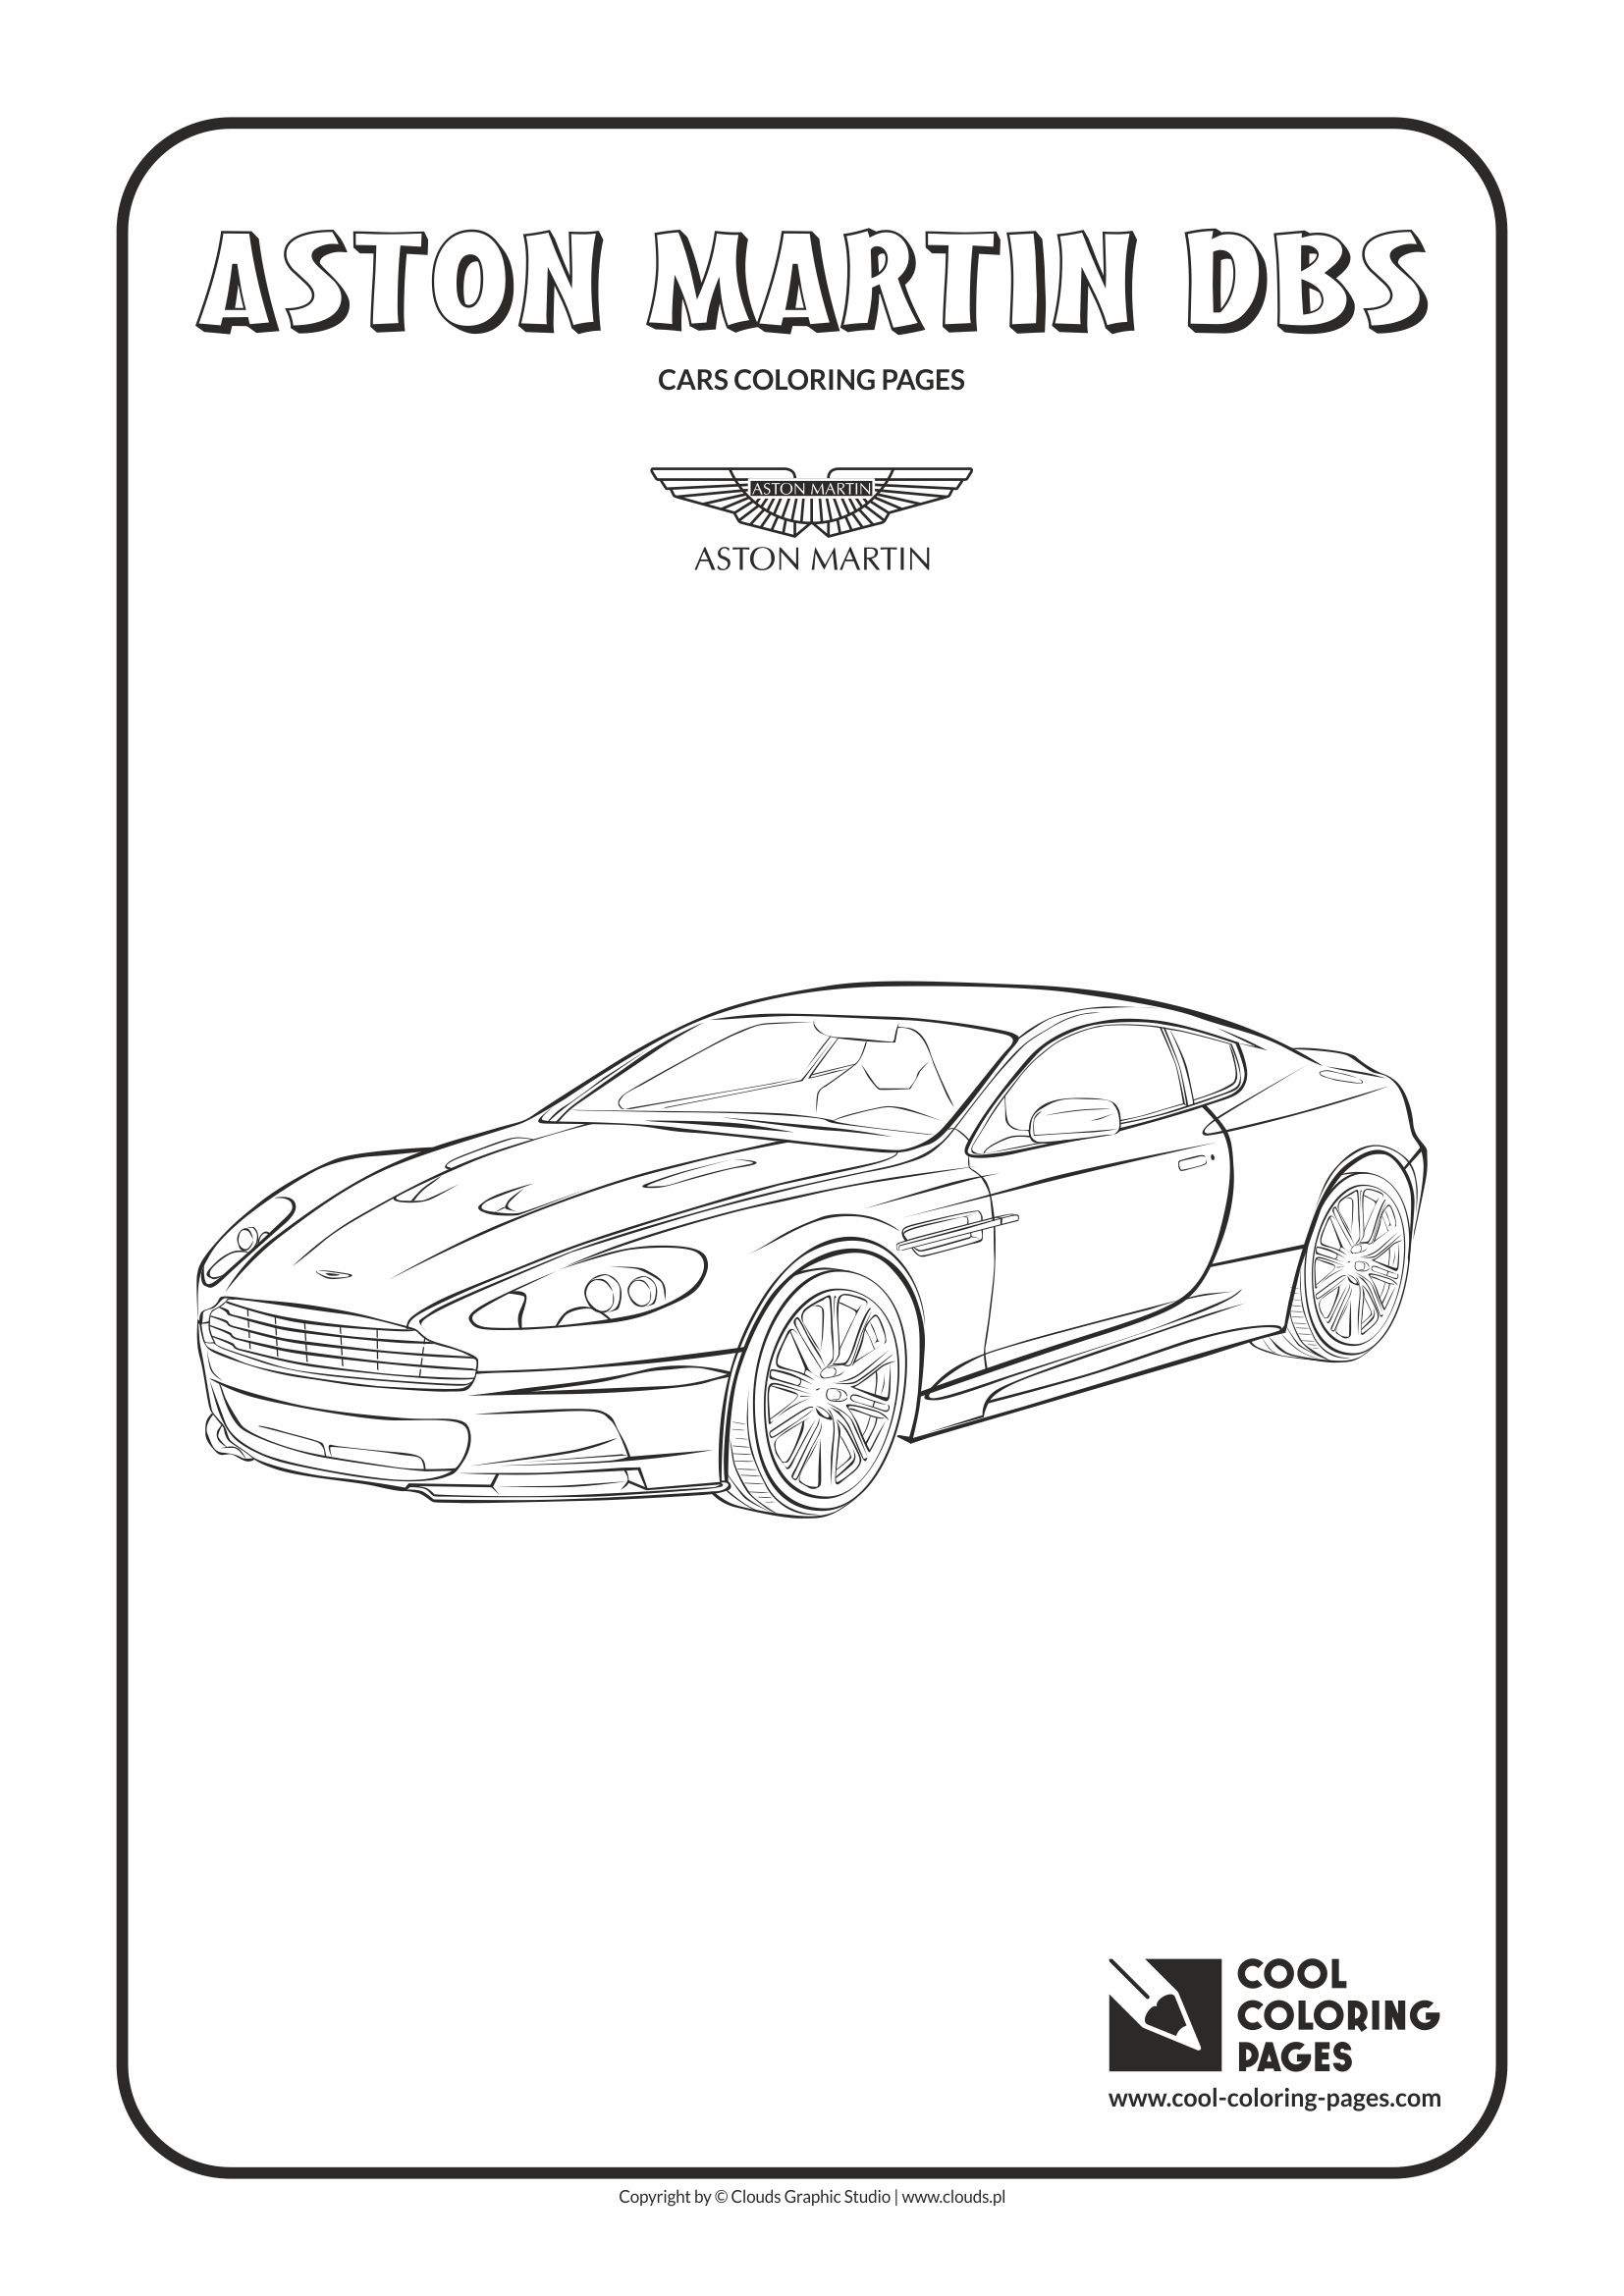 Cool Coloring Pages - Vehicles / Aston Martin DBS / Coloring page with Aston Martin DBS